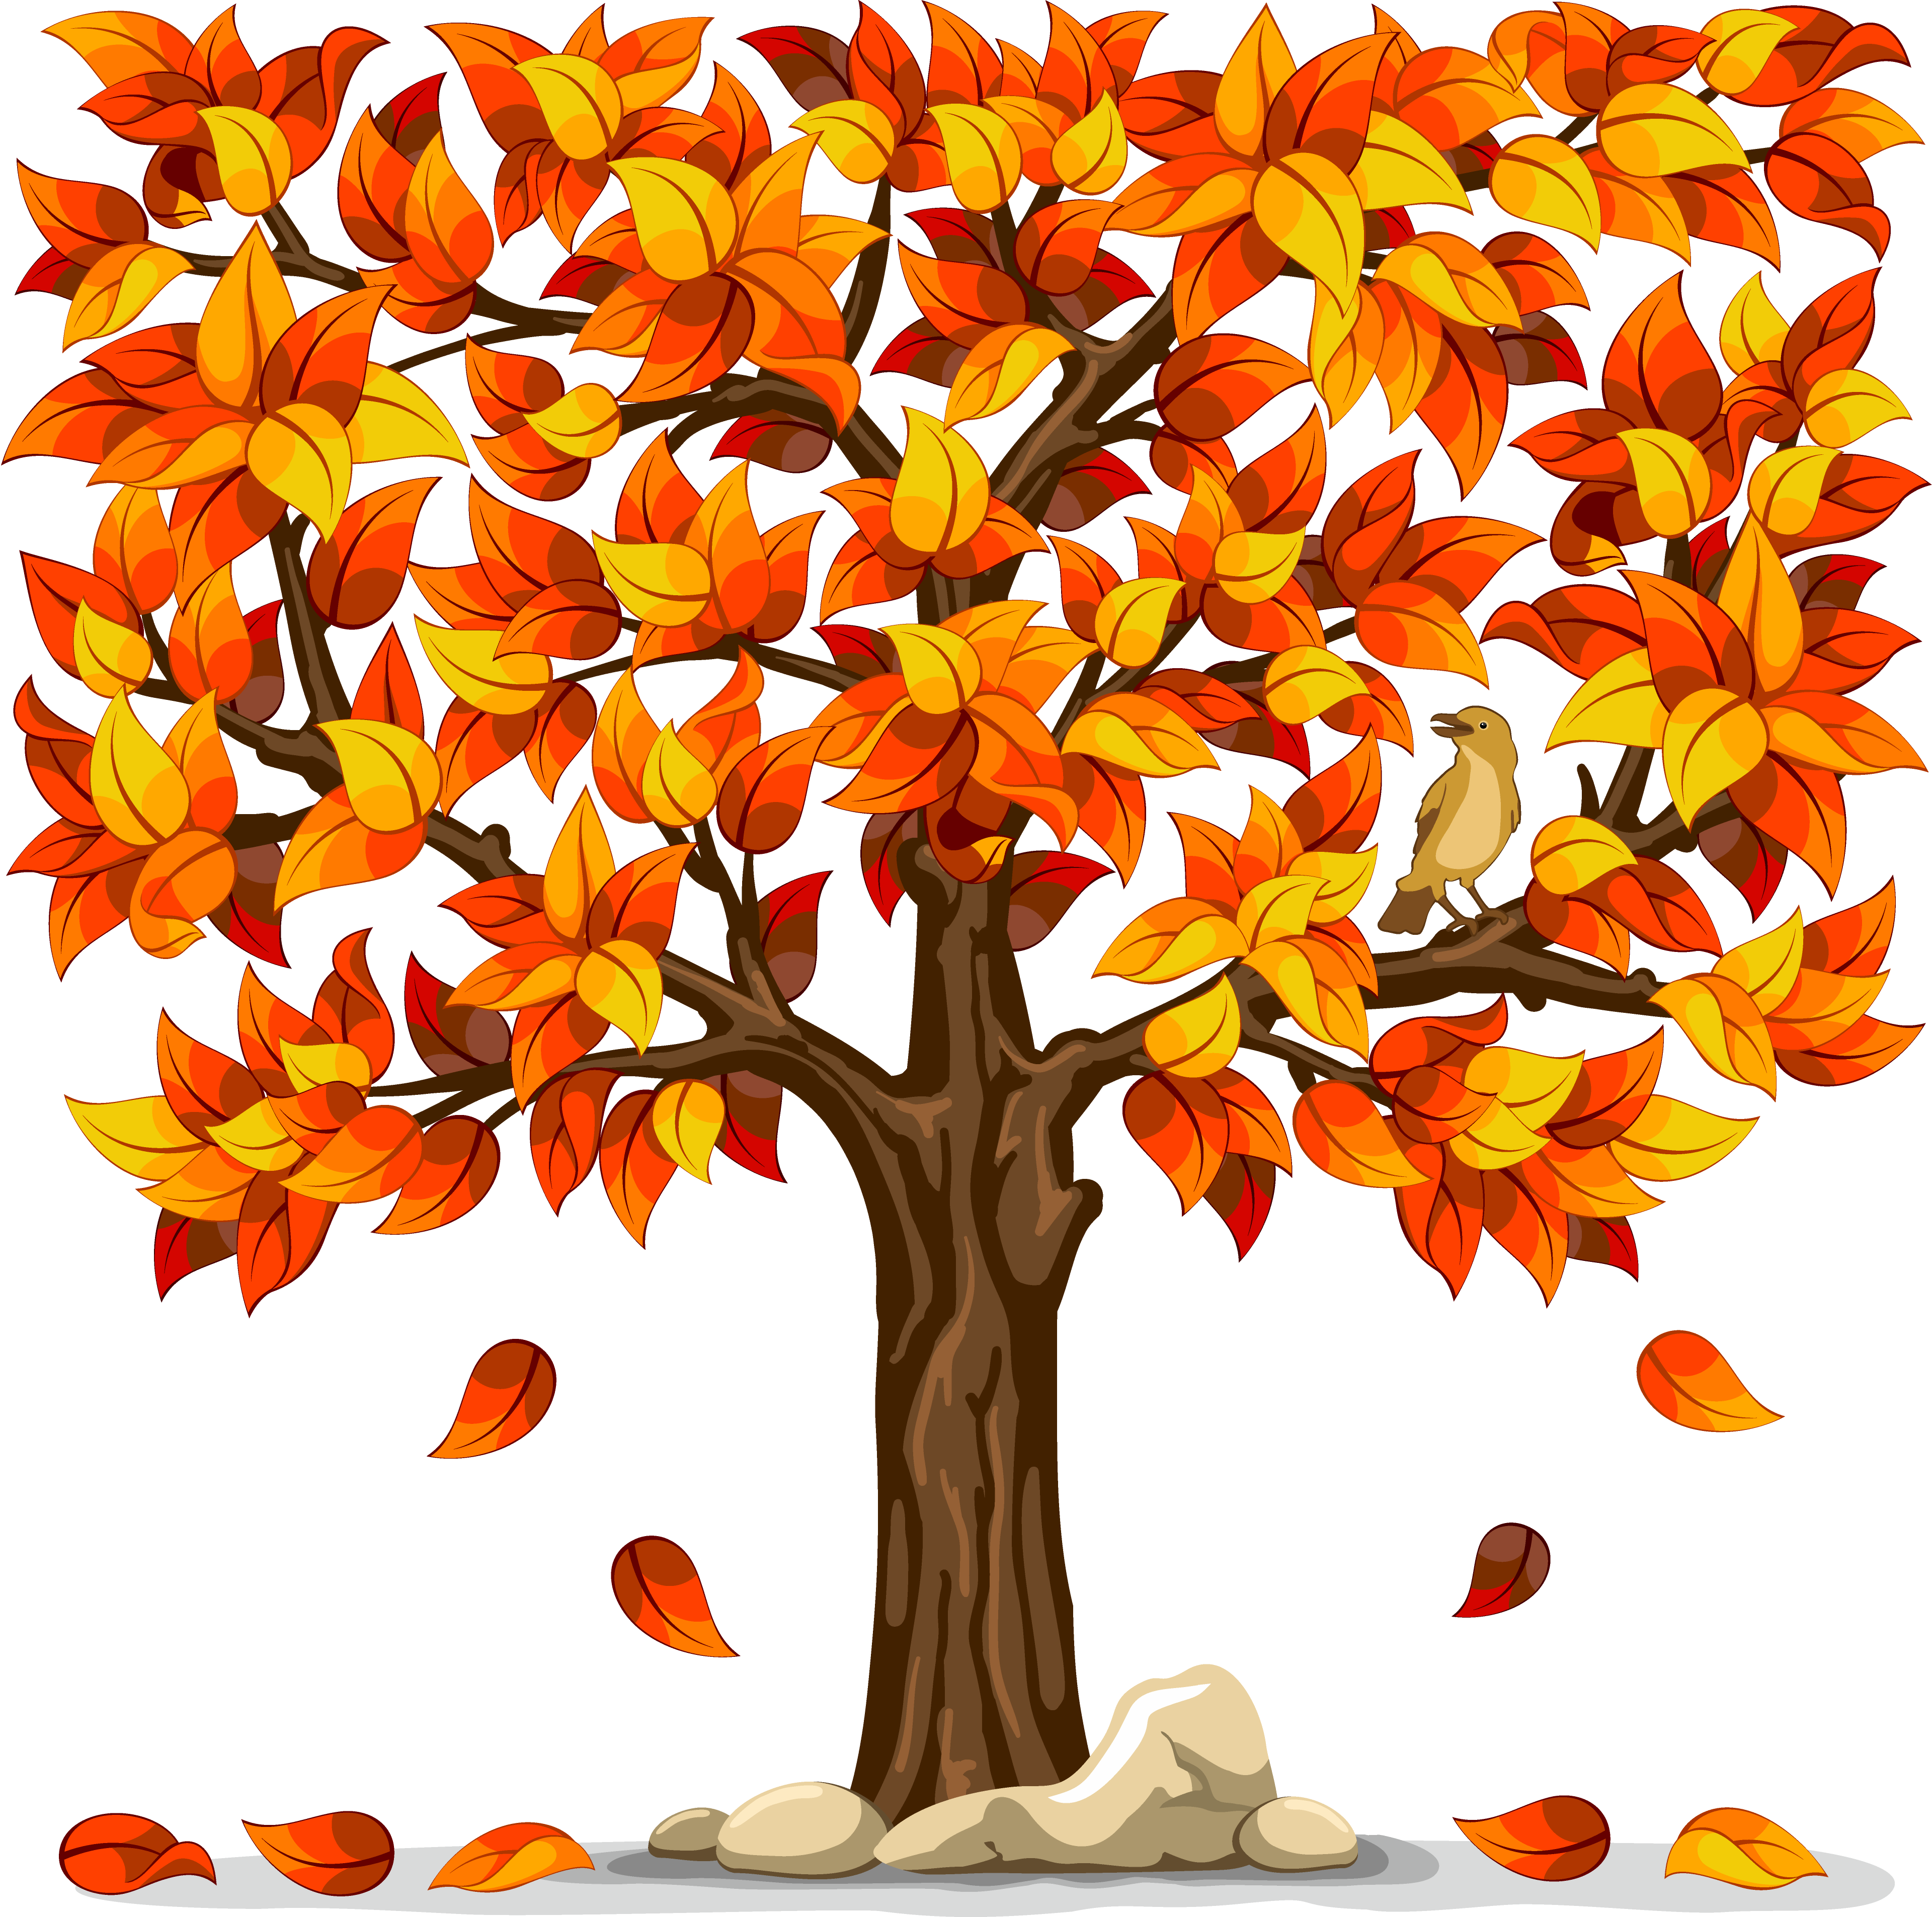 Autumn Tree With Falling Leaves Clip Art